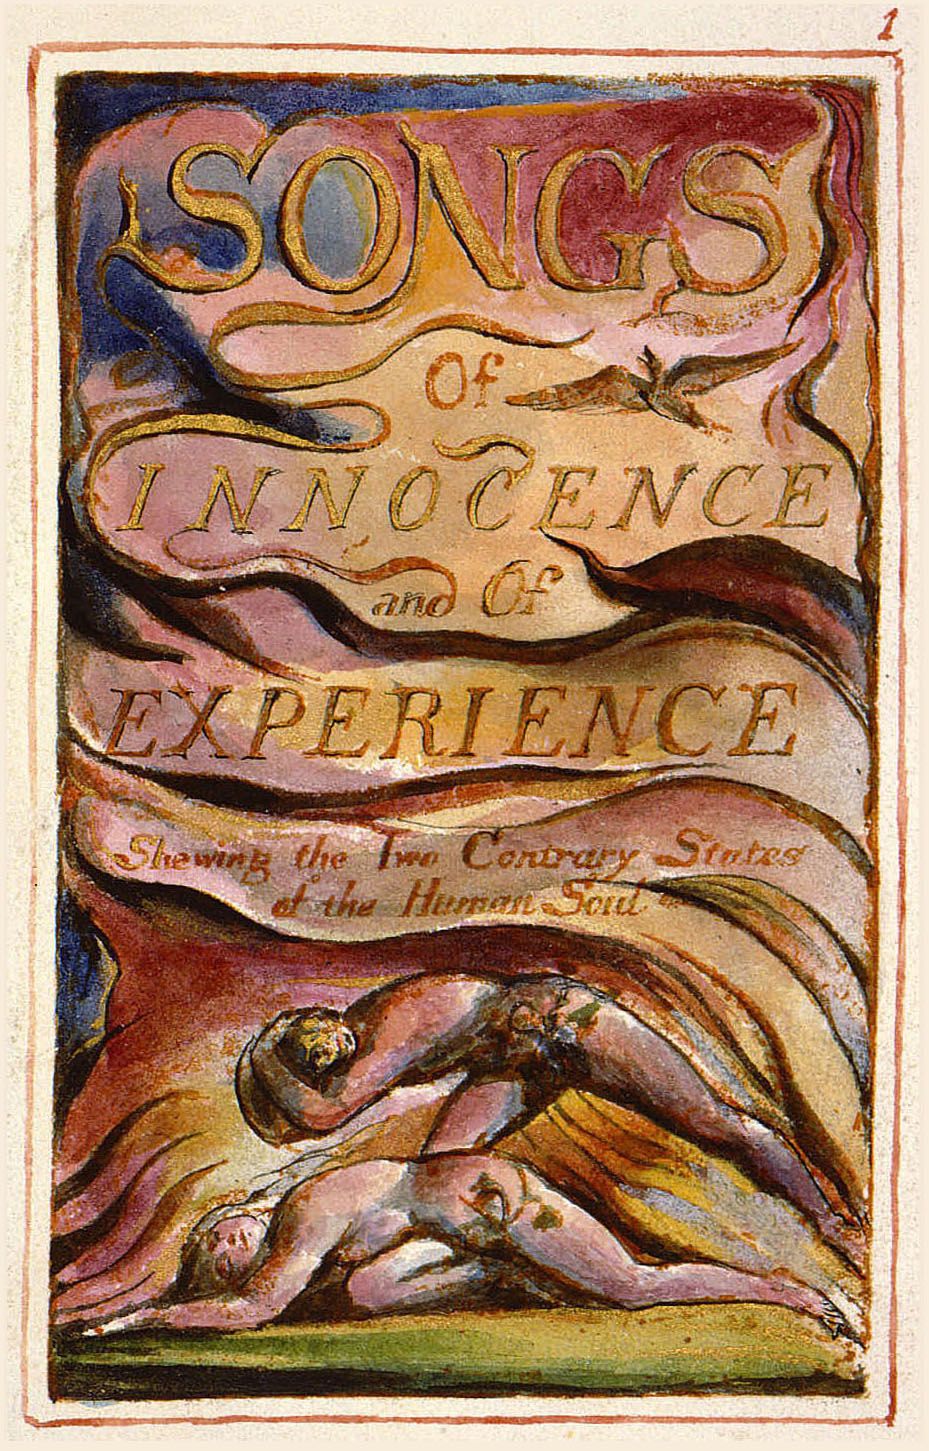 the painted cover of Songs of Innocence and Experience